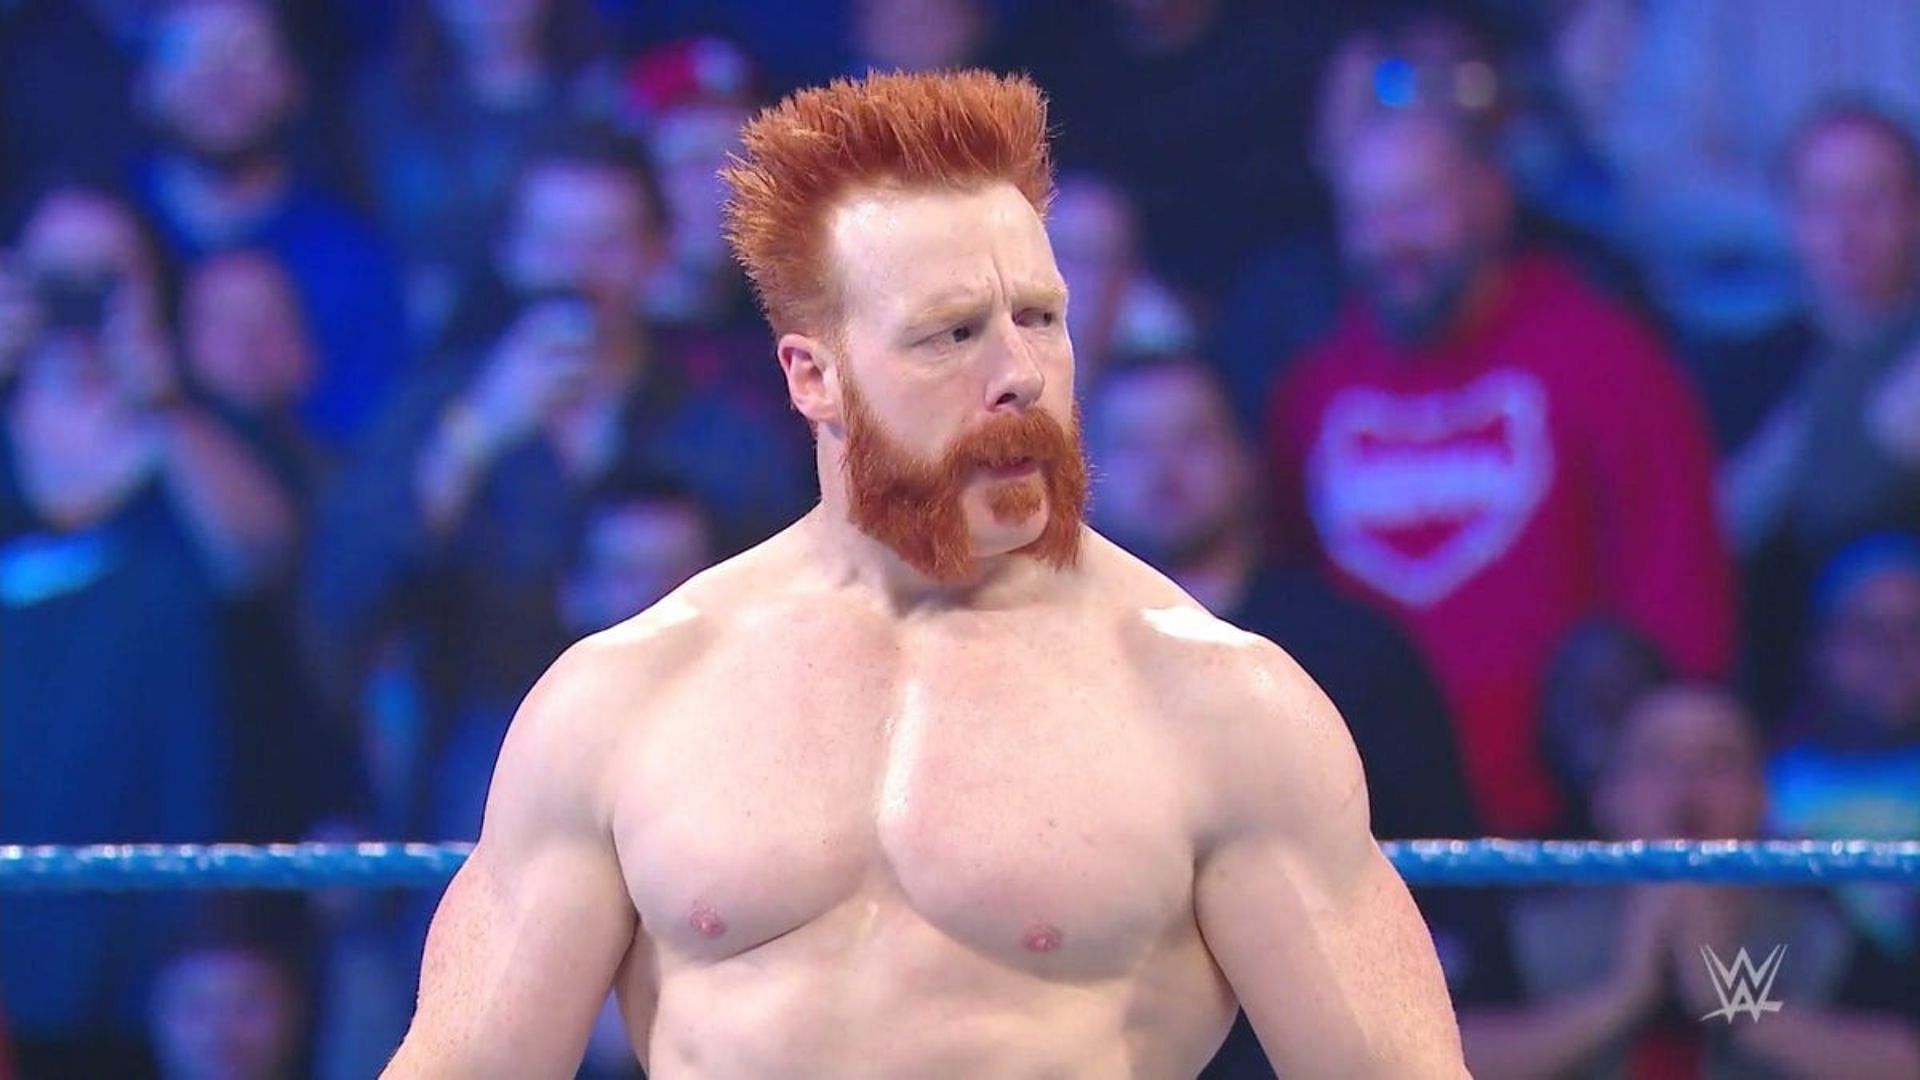 Sheamus and Reigns have a history that dates back to 2015